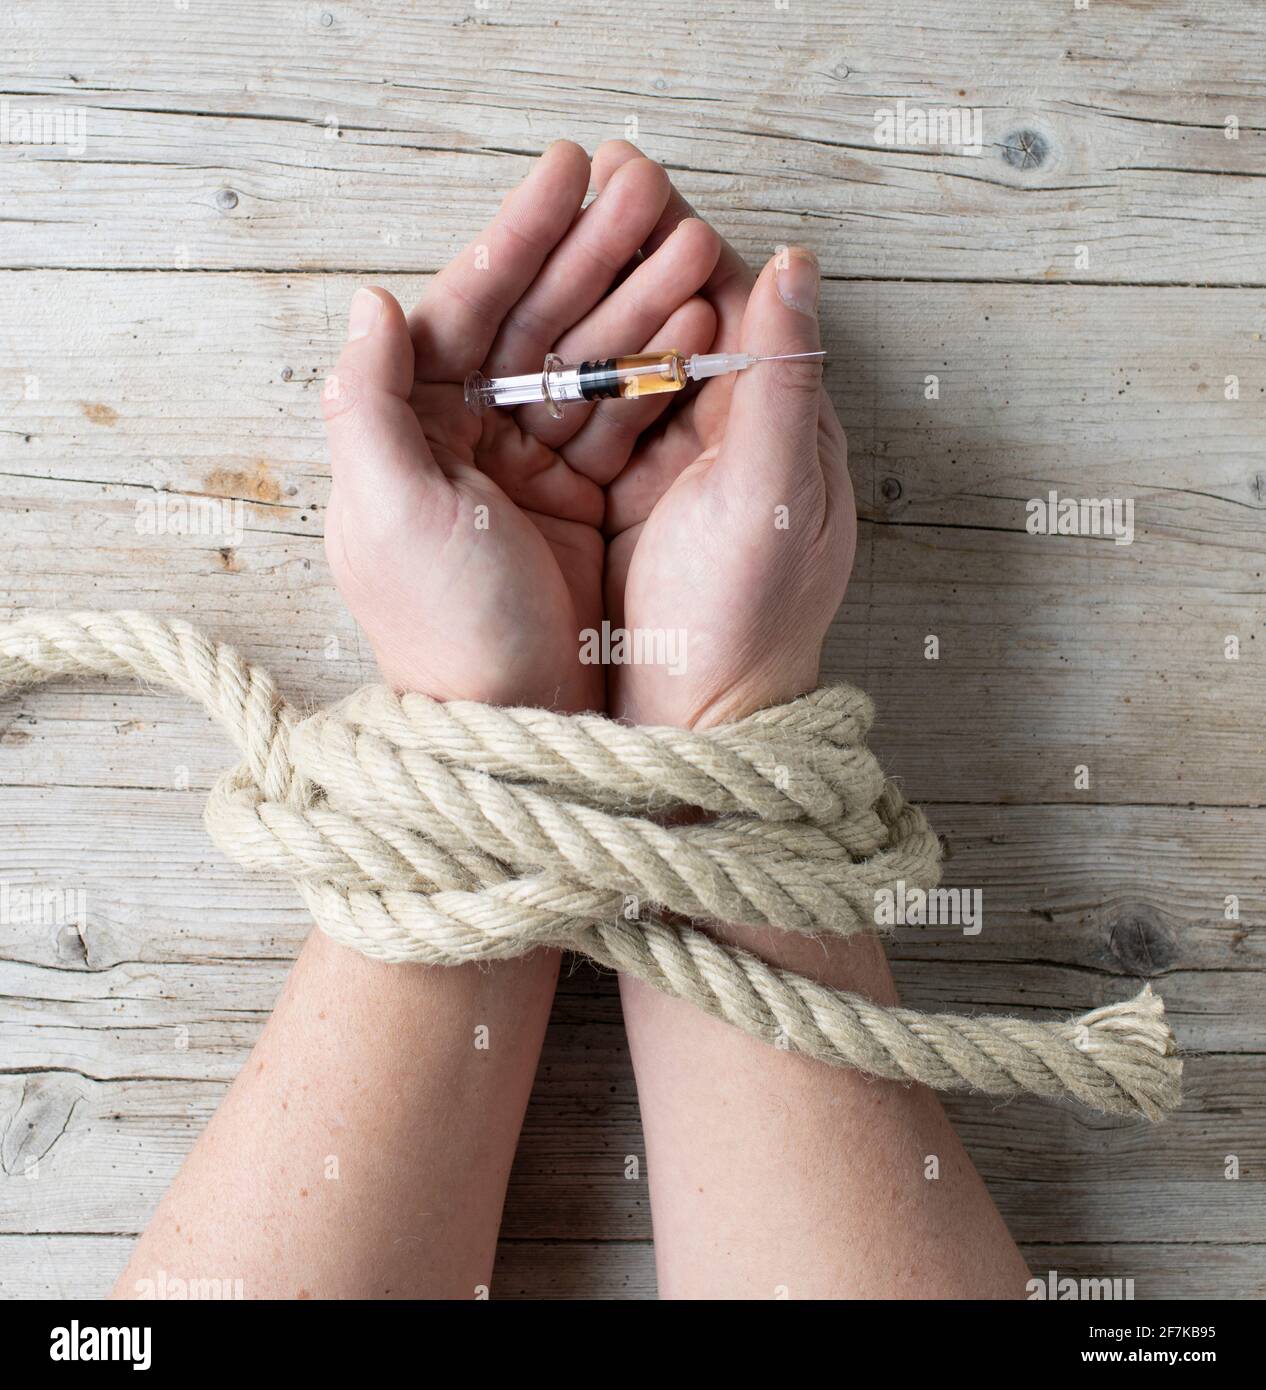 male hands are tied and hold syringe, concept addiction, drugs, drug addiction, photo taken from above Stock Photo